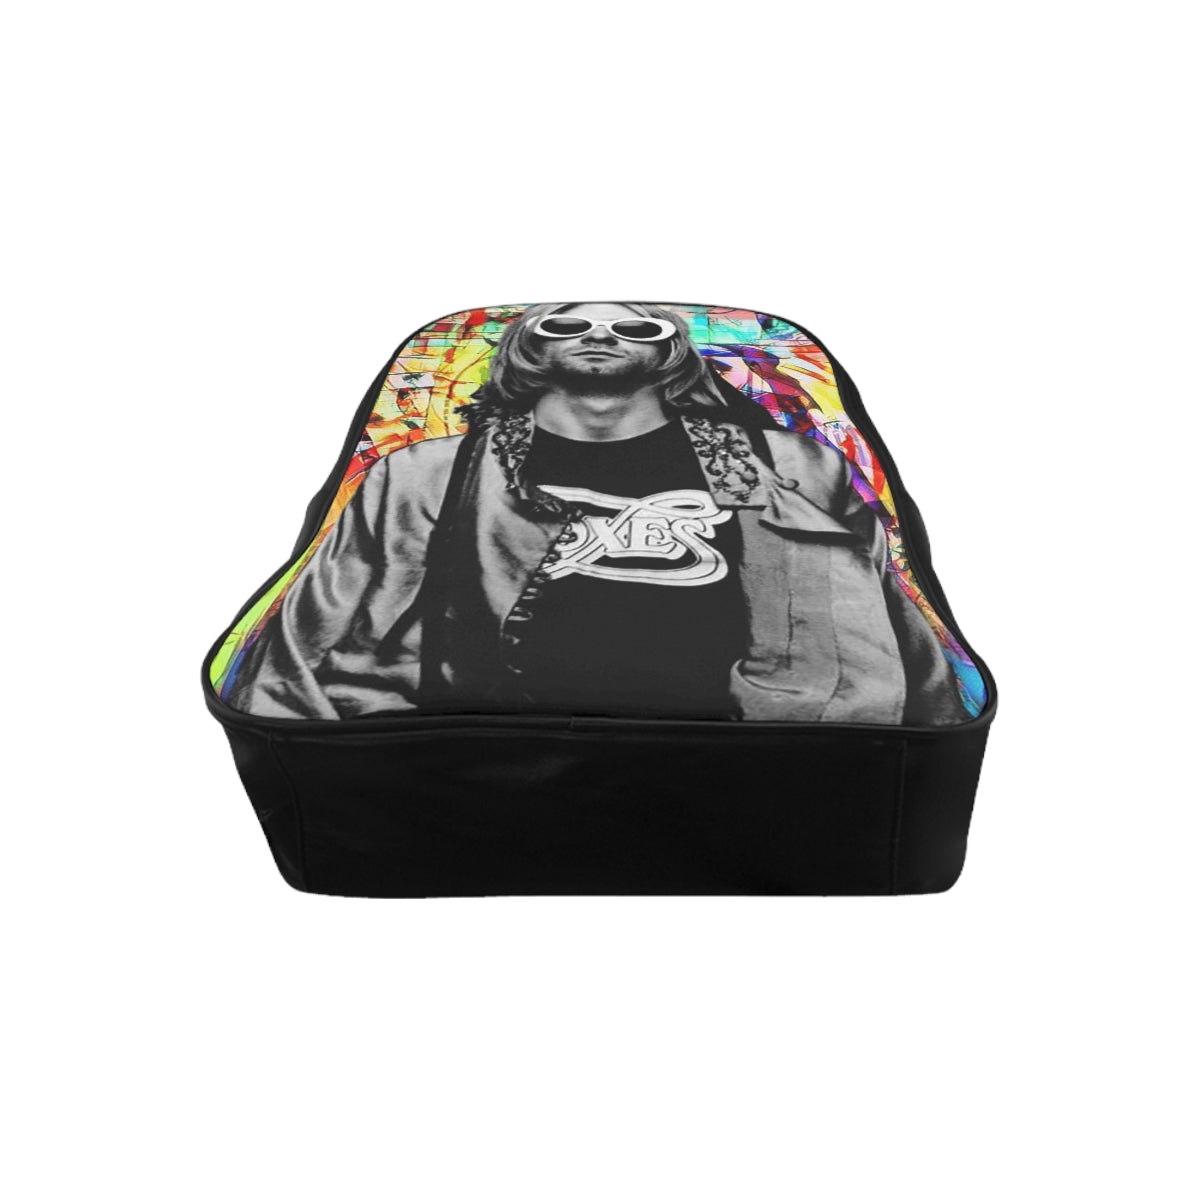 Getrott Nirvana Graffiti Poster PU leather School Backpack Carry-On Travel Check Luggage 4-Wheel Spinner Suitcase Bag Multiple Colors and Sizes